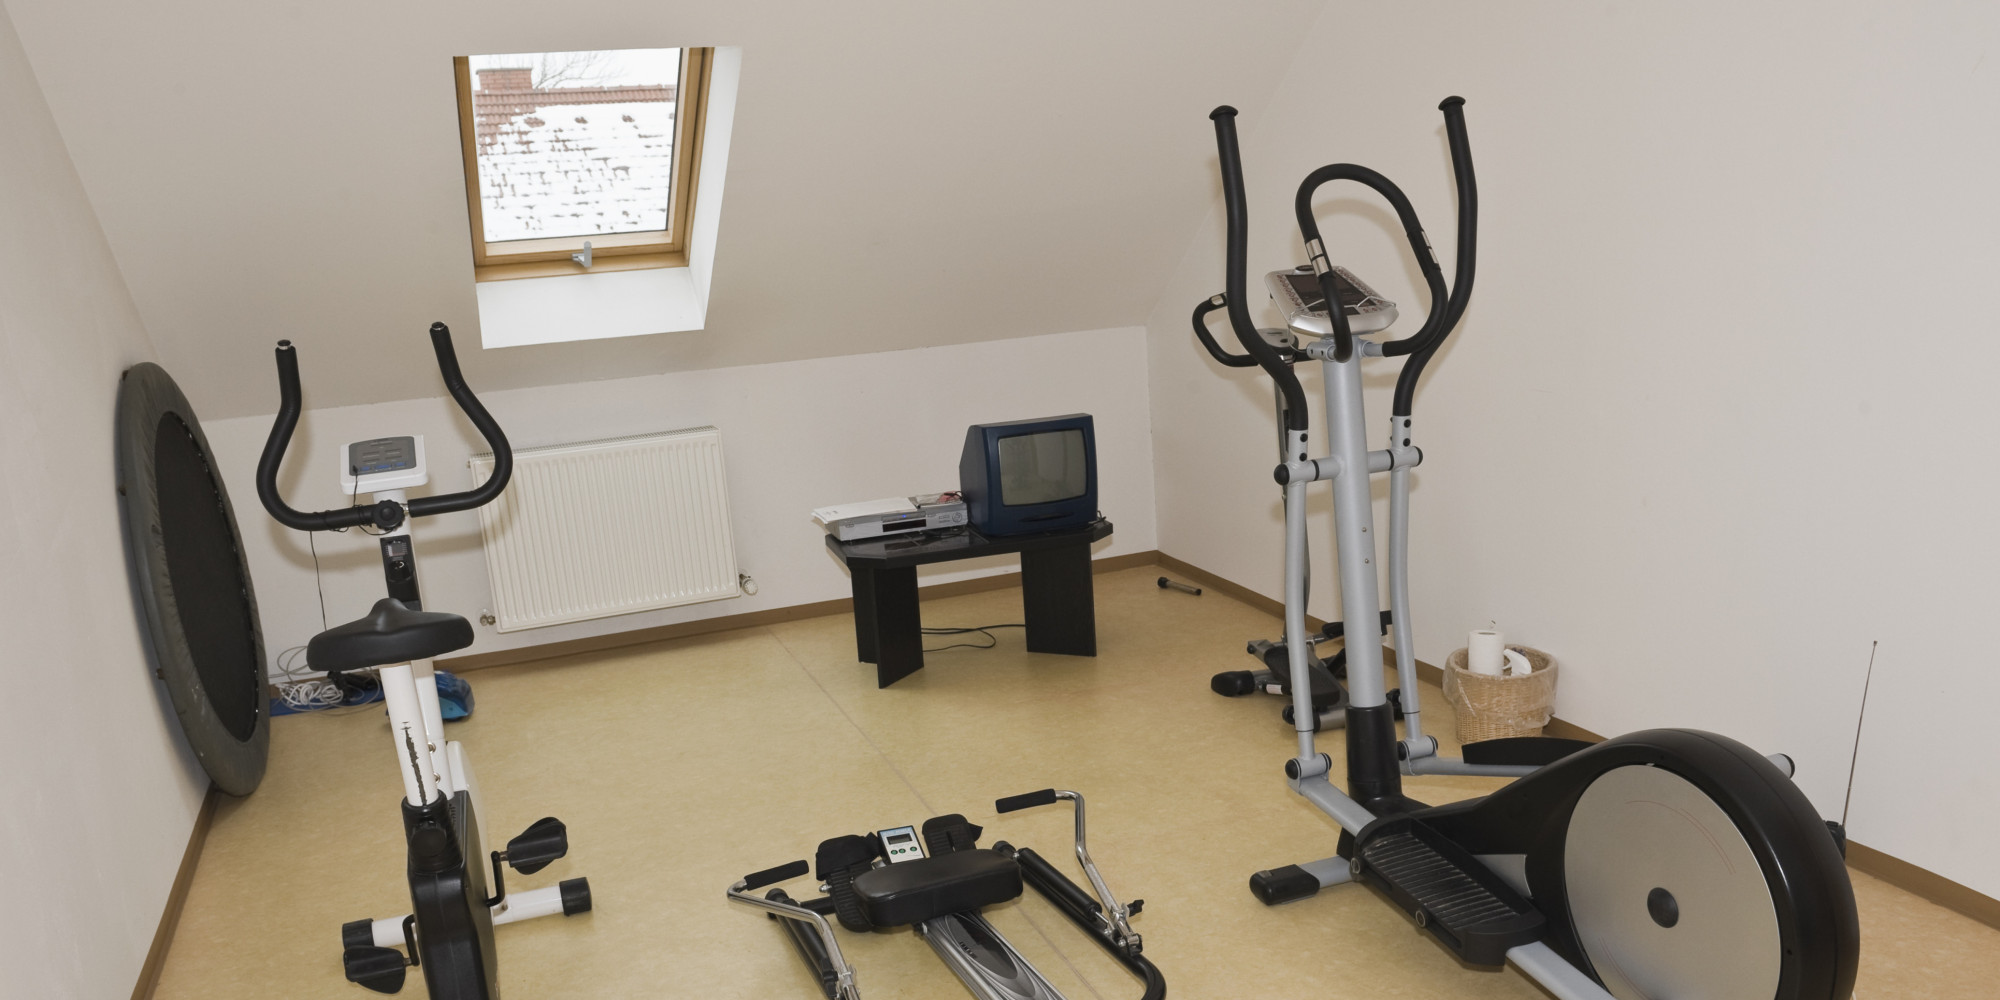 Choosing the Right Home Exercise Equipment | HuffPost